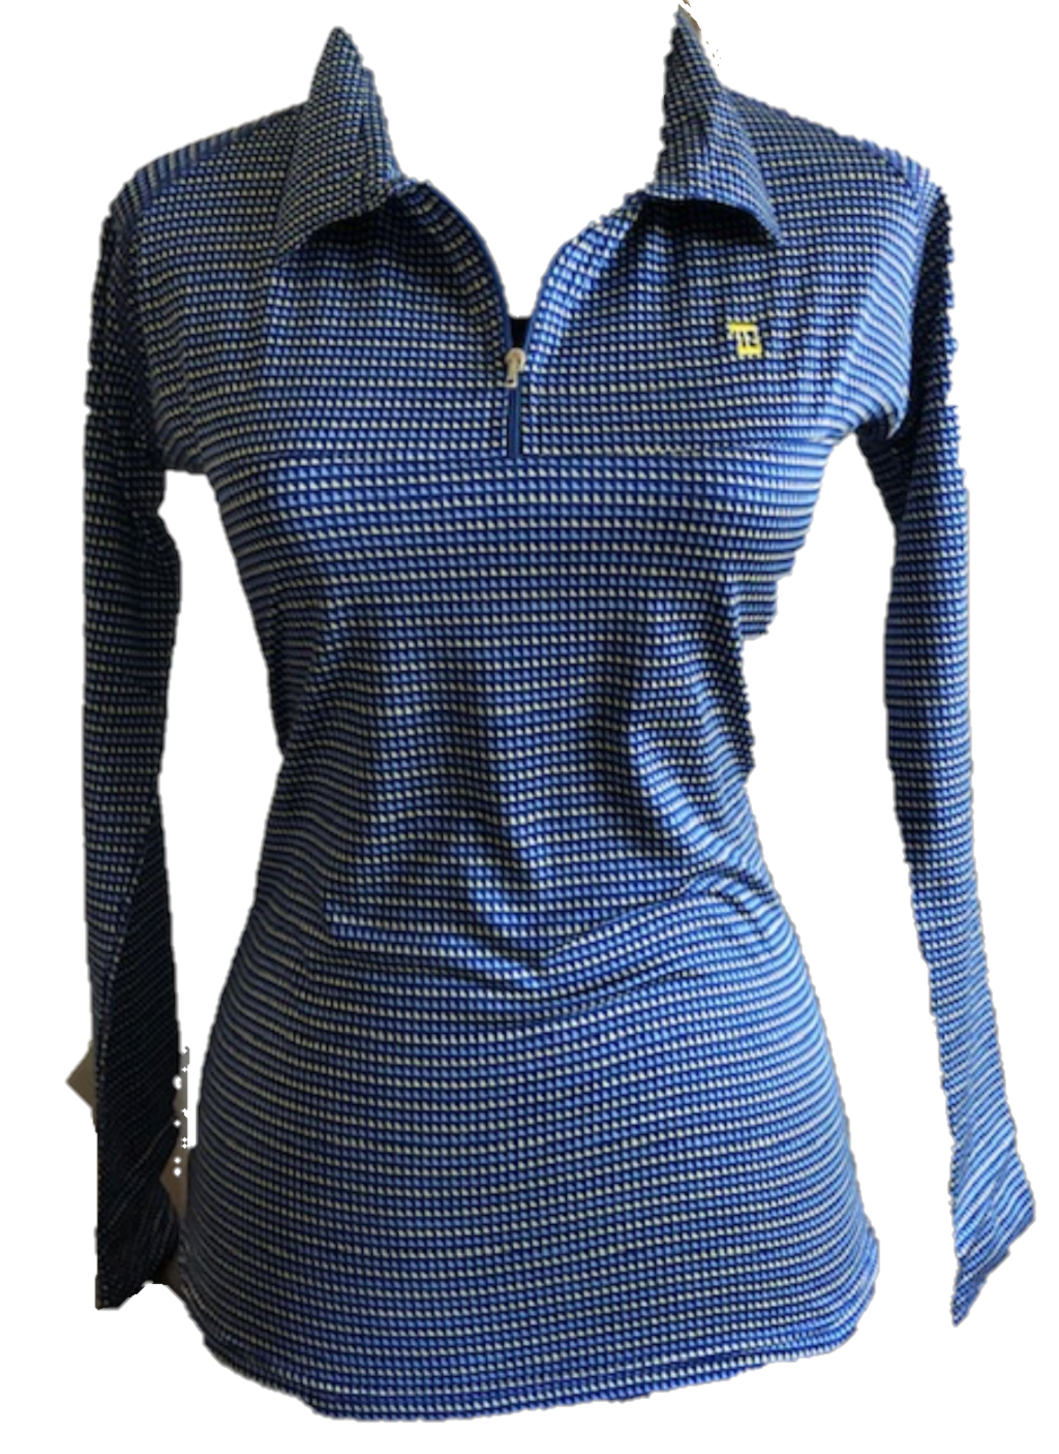 TG-LT-095 || Ladies Top Long Sleeve Mid Blue With Blue And Yellow Hounds Tooth Motif & Zipper Neck